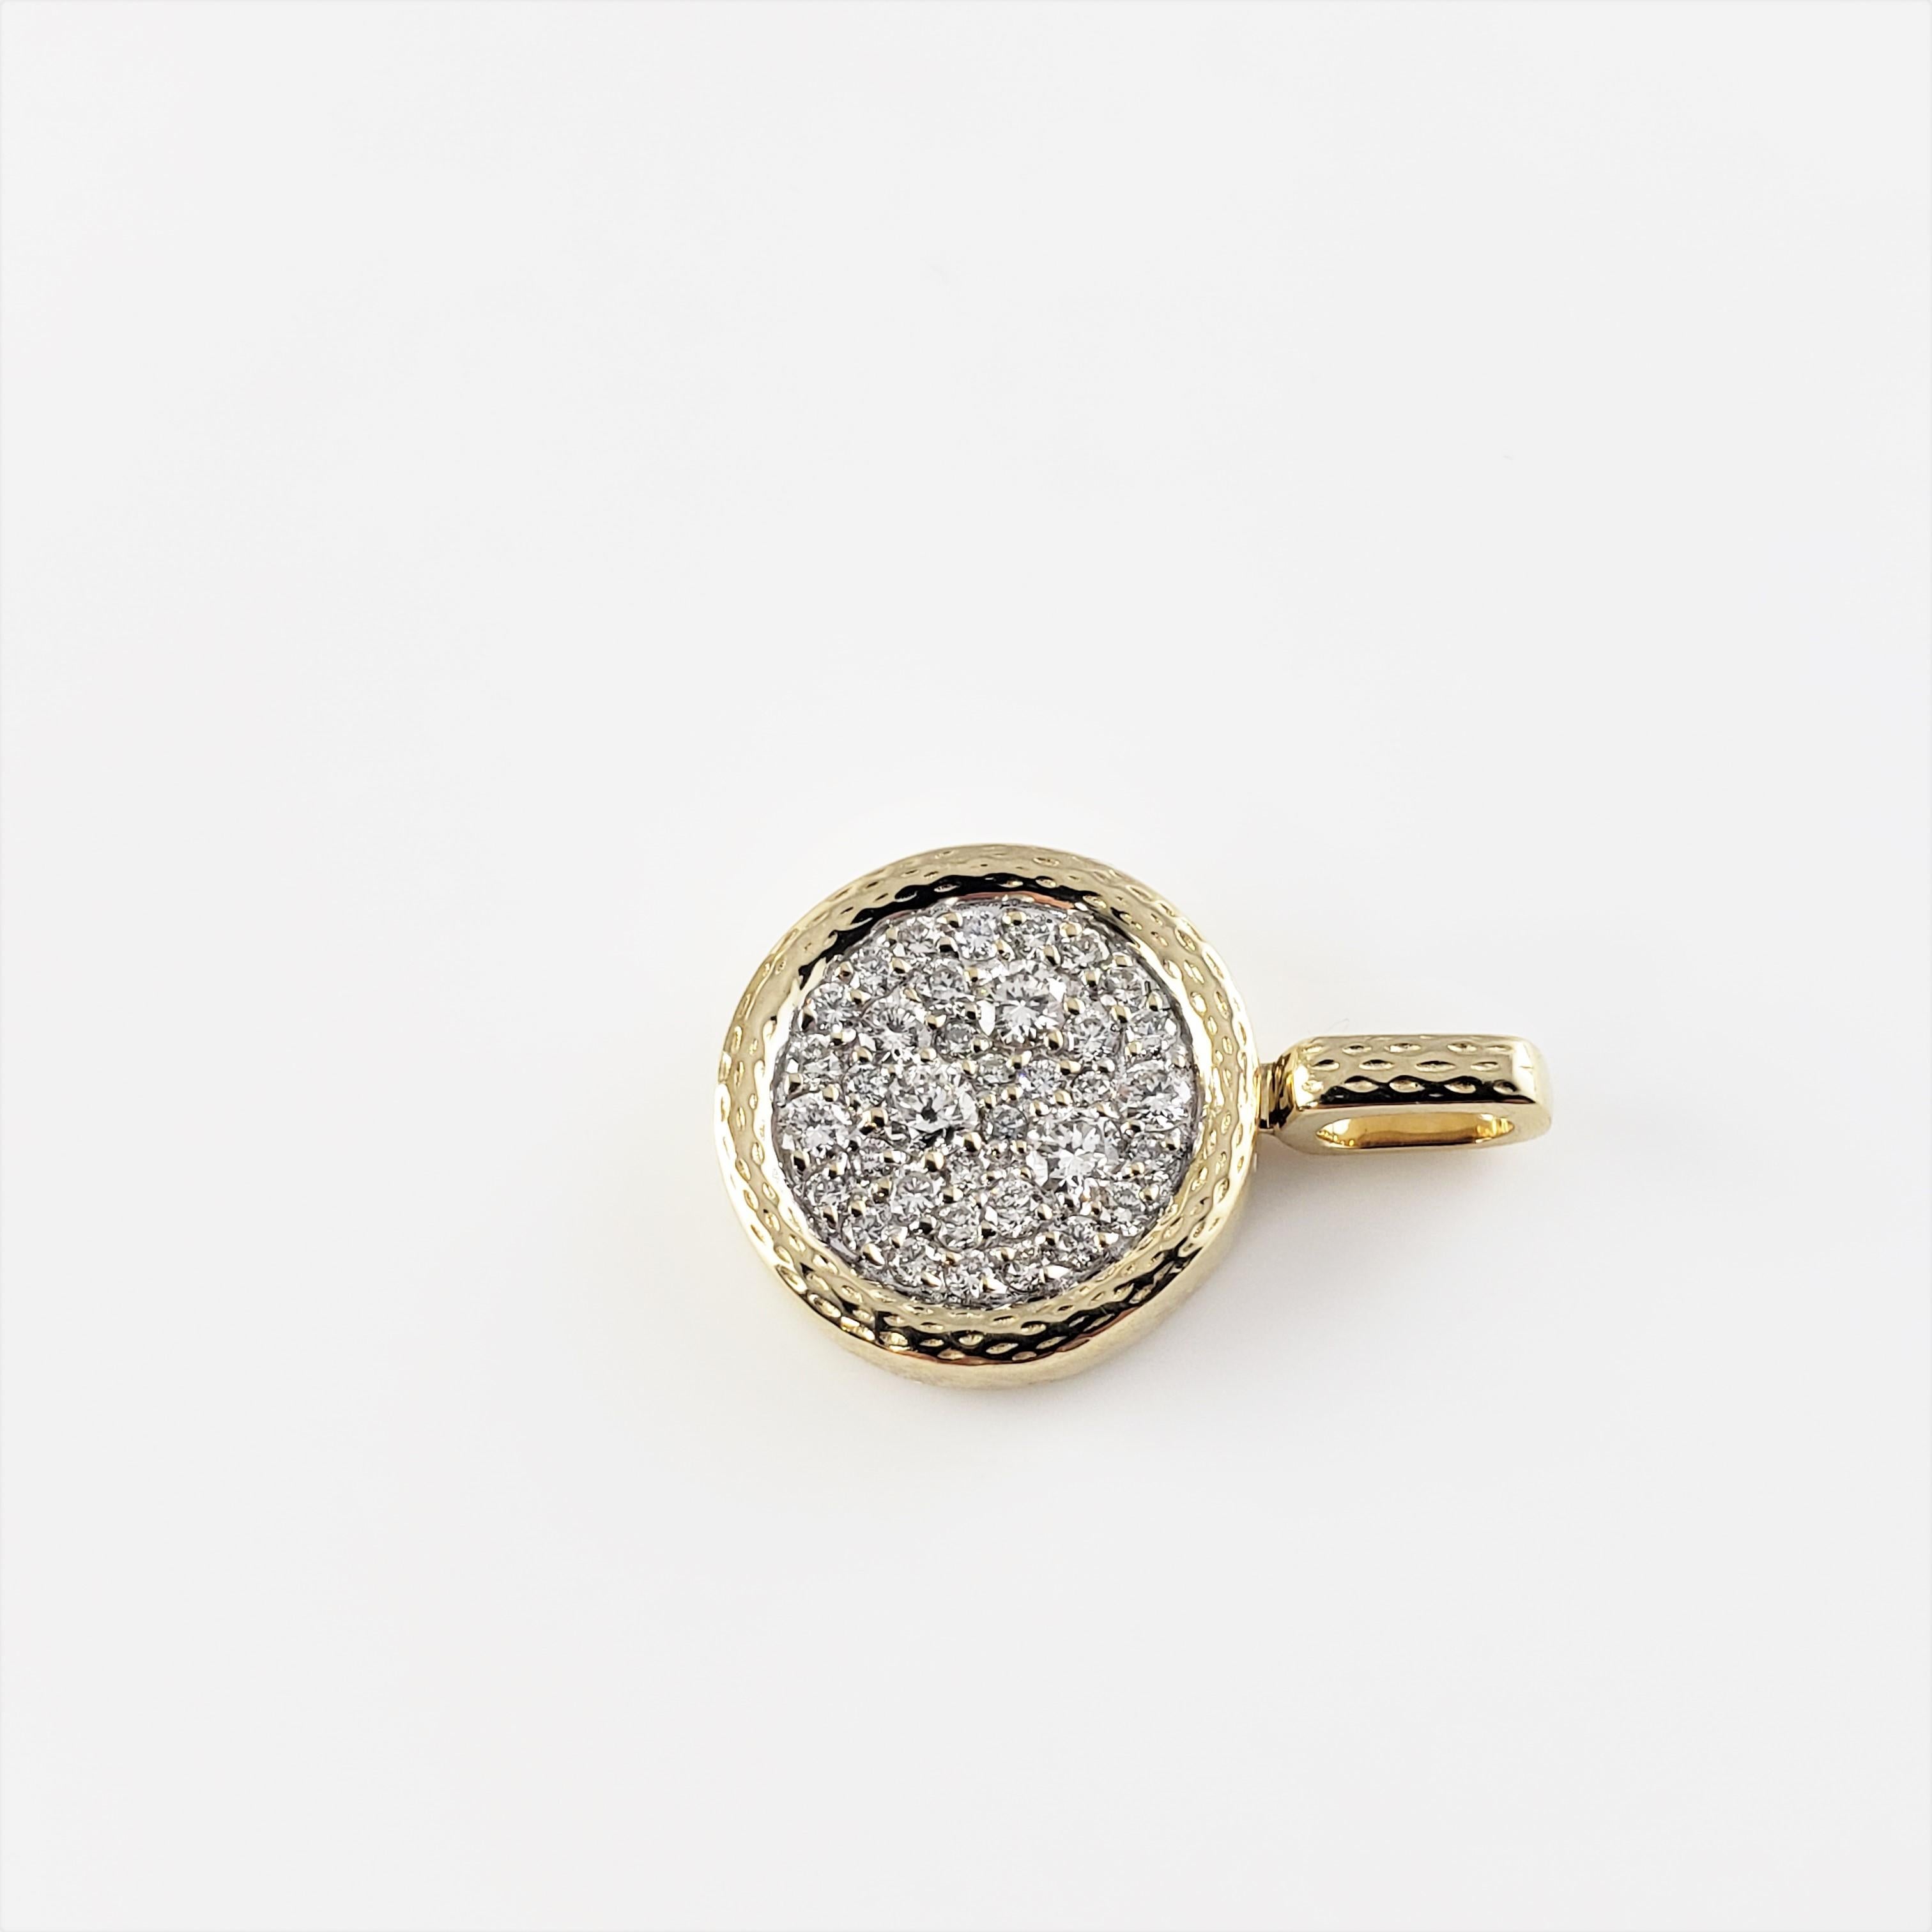 14 Karat Yellow Gold Diamond Pendant-

This sparkling pendant features 36 round brilliant cut diamonds set in classic 14K yellow gold.

Approximate total diamond weight:  .40 ct.

Diamond color:  G-H

Diamond clarity:  SI1-VS2

Size: 11 mm x 11 mm